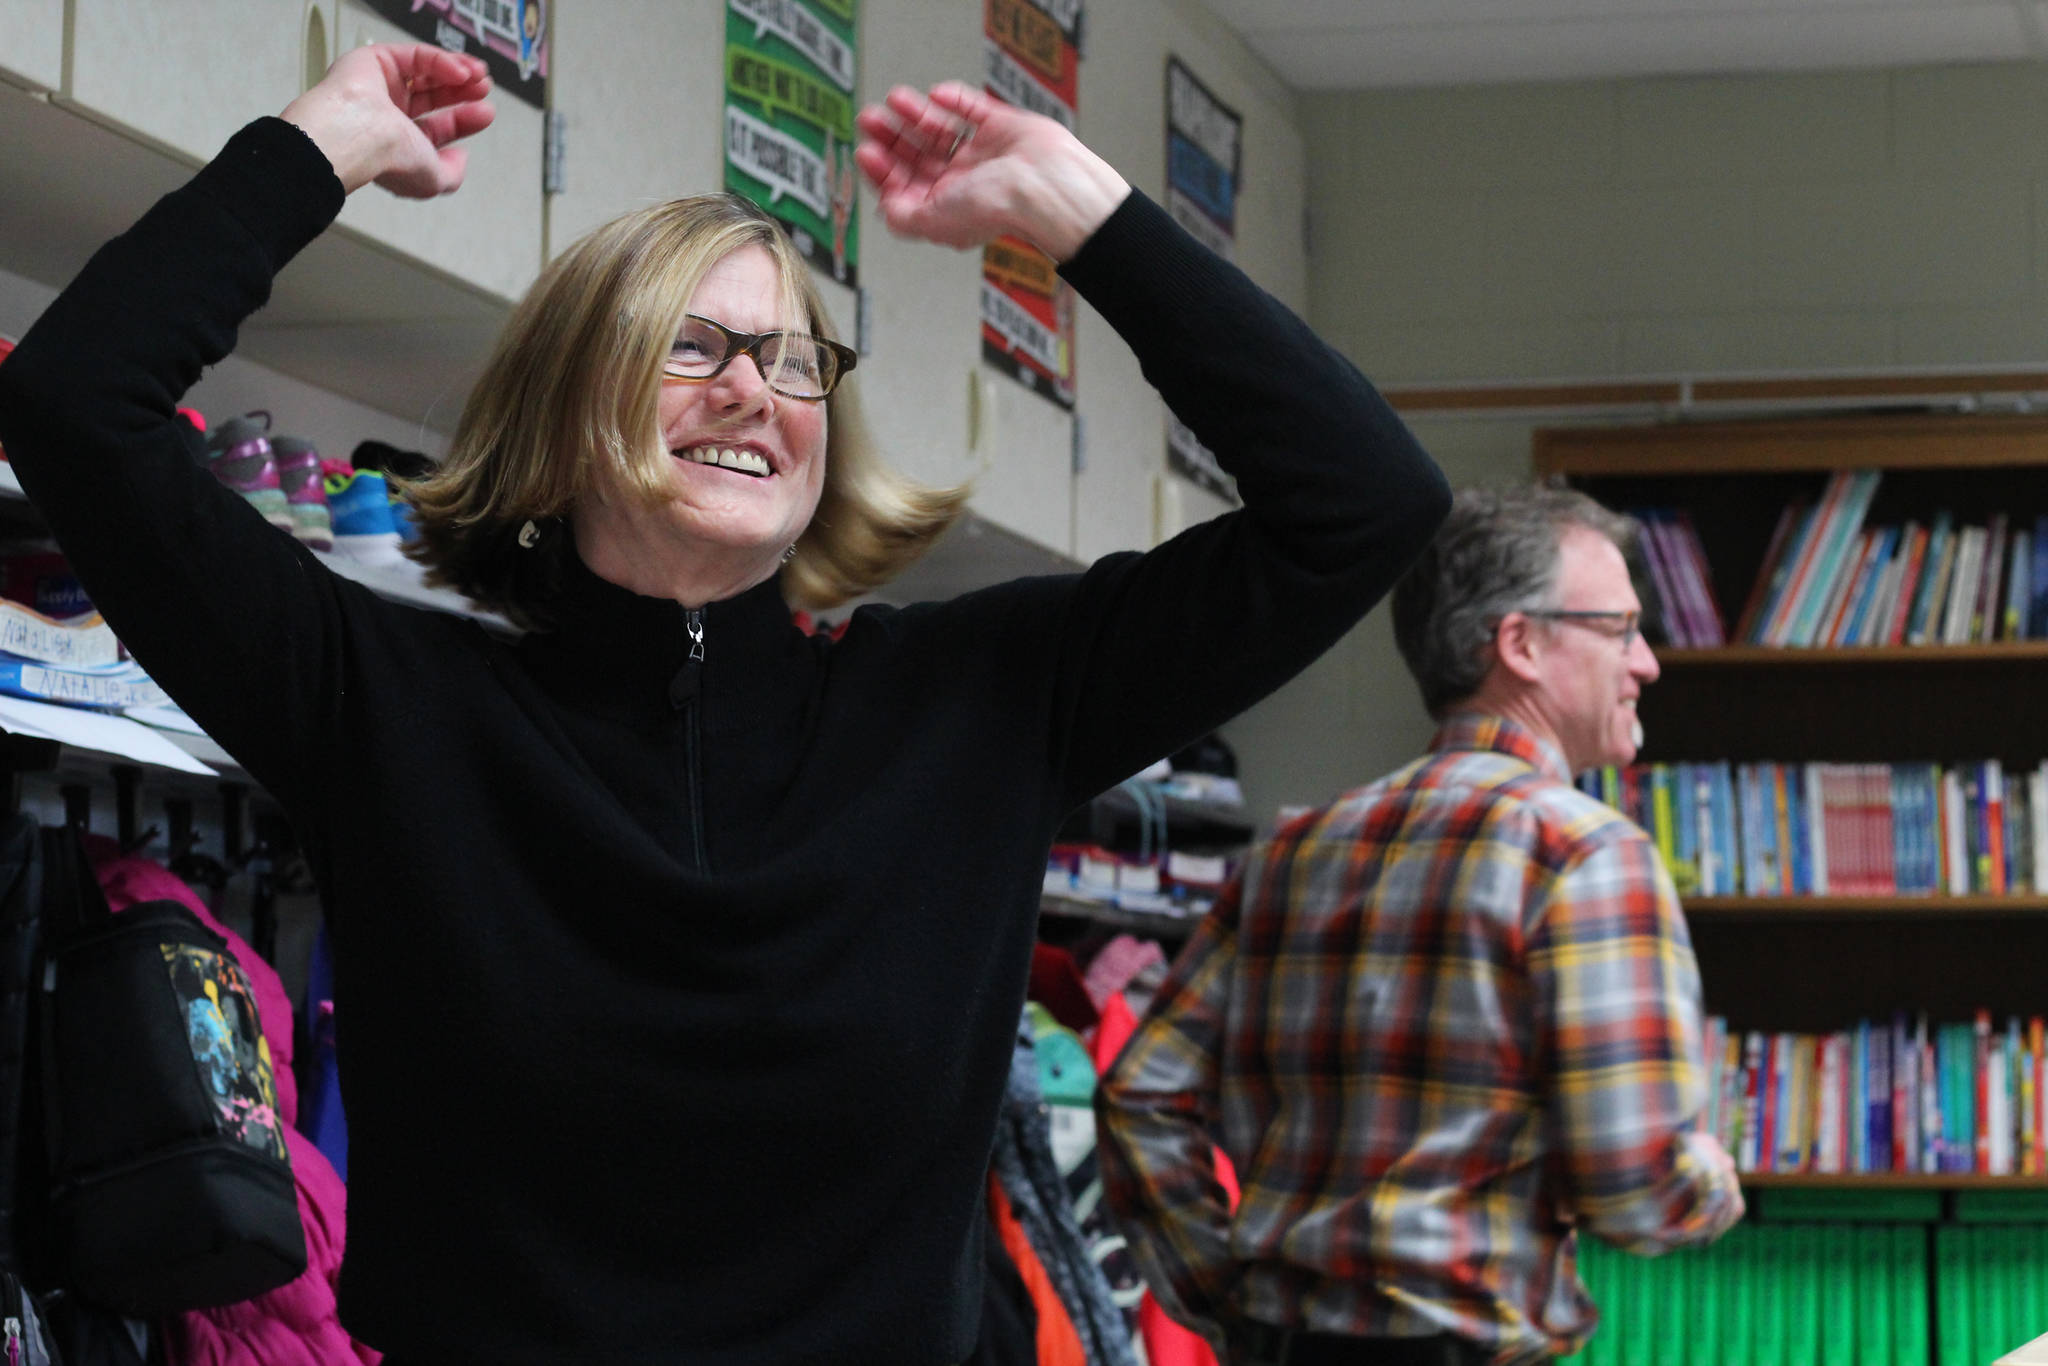 Karen Lloyd, director of the Veterans History Project at the Library of Congress in Washington, D.C., dances the hokey pokey along with West Homer Elementary Principal Eric Waltenbaugh (background) during a special lesson taught by retired McNeil Canyon teacher Bill Noomah on Thursday, Oct. 19, 2017 at the elementary school in Homer, Alaska. Noomah, whose lesson was created to teach kids about Veterans Day and about using primary sources in research, had the students (and adults) take breaks by getting up and dancing. Lloyd was visiting Alaska from D.C. and came to Homer when she heard Noomah would be presenting his lesson, which is based on a collection from the Veterans History Project. (Photo by Megan Pacer/Homer News)